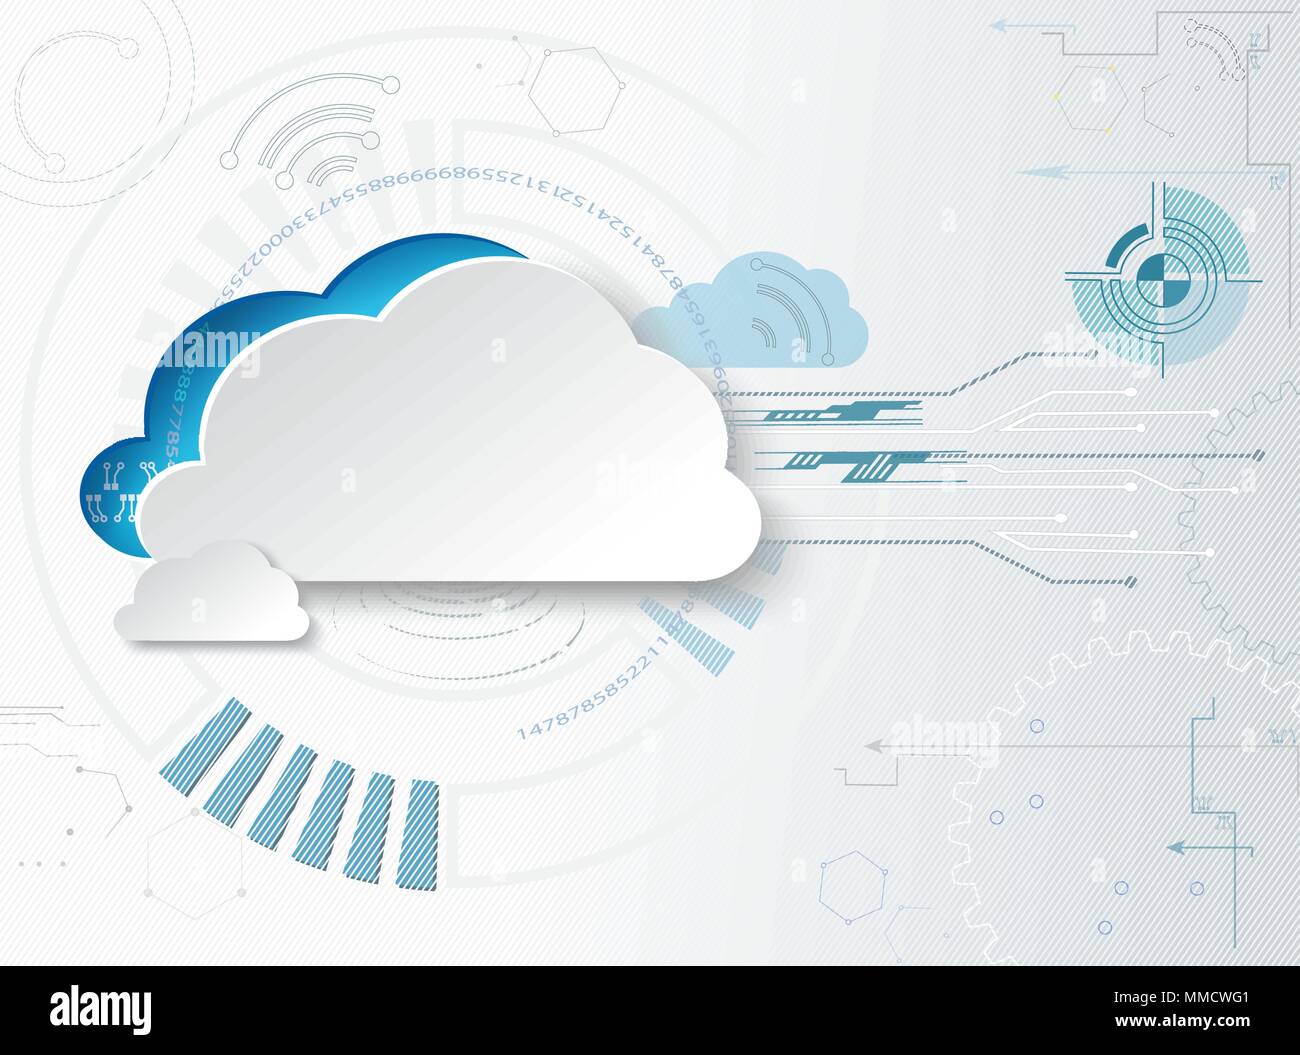 Hitech business background. Web-based cloud technologies Stock Vector